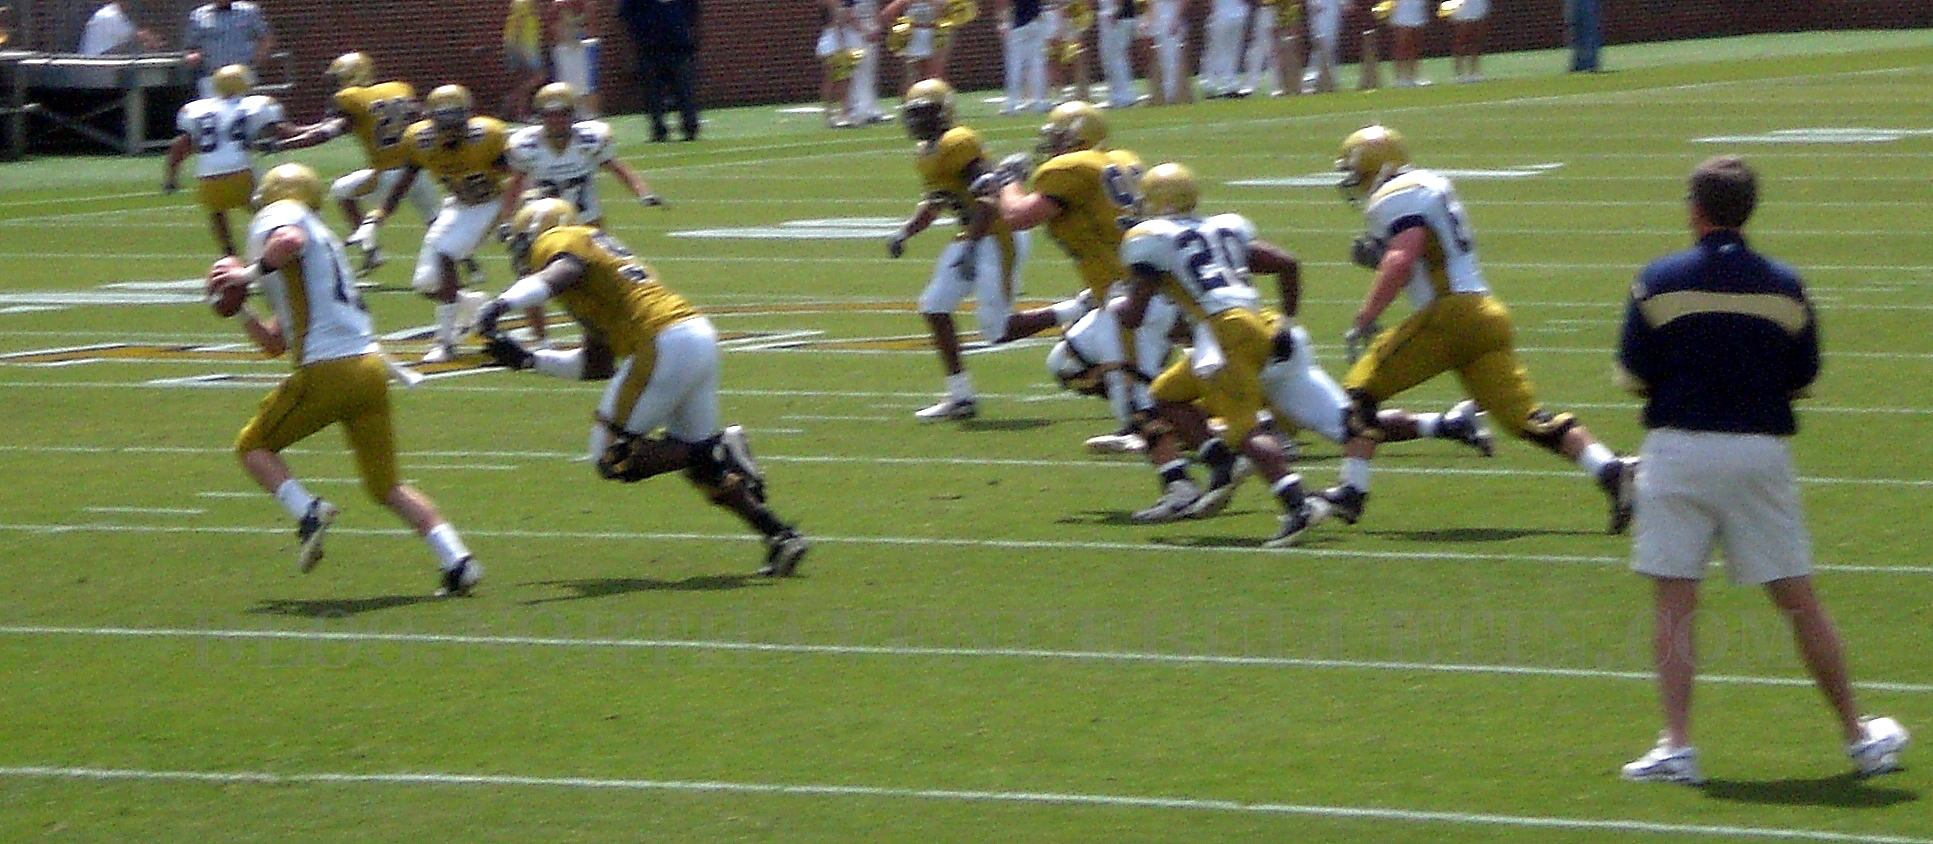 the yellow uniforms are running with the ball